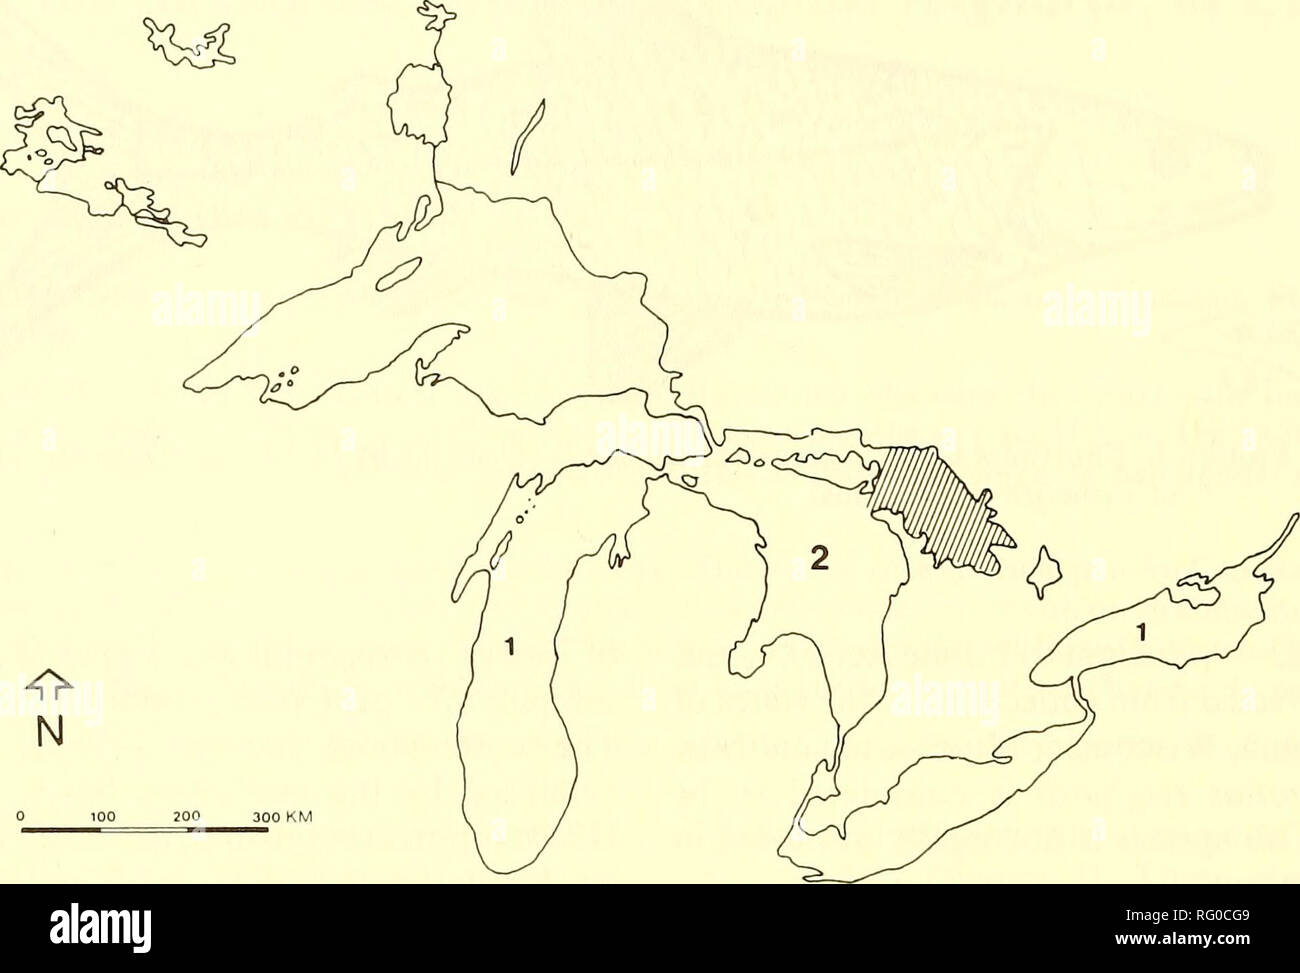 . The Canadian field-naturalist. 94 The Canadian Field-Naturalist Vol. 102. Figure 2. Distribution of the Shortnose Cisco in Canada. Extant, Georgian Bay (rare to common). 1. Extirpated (Todd 1980). 2. Rare, Lake Huron (T. Todd, personal communication). Habitat Little is known of the degree of habitat specialization of this species. Depth distribution is generally shallower than most other deepwater ciscos, and other than maintaining a close association with the bottom during spawning, Coregonus reighardi apparently inhabits the midwaters during the balance of the year (Stone 1944;Gray 1979).  Stock Photo